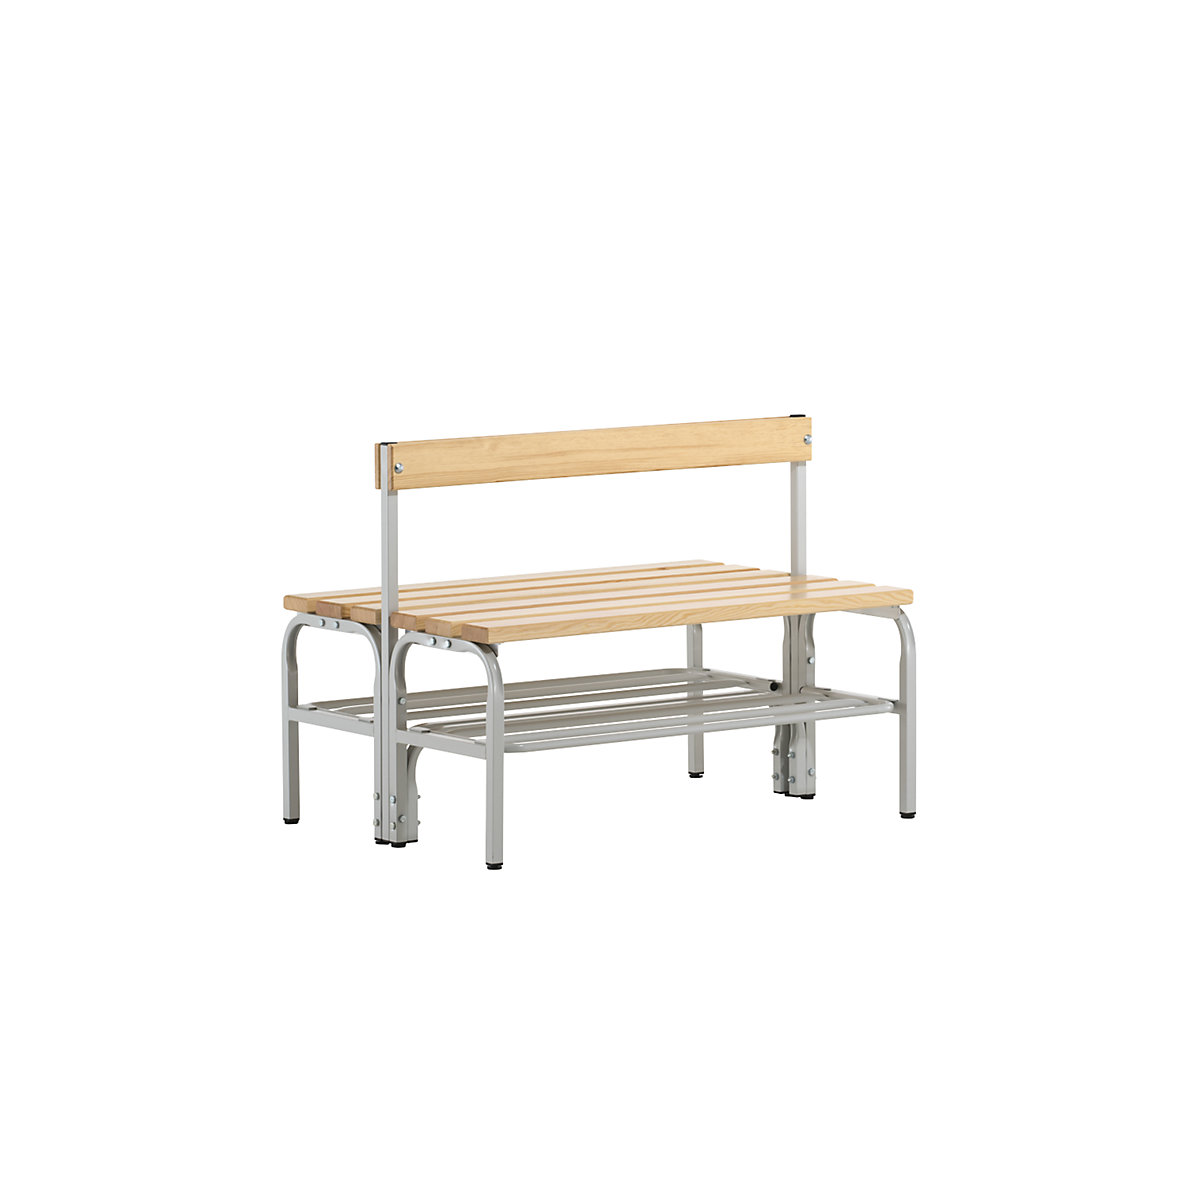 Half height cloakroom bench with back rest, double sided – Sypro, pine wood slats, length 1015 mm, light grey, shoe rack-6